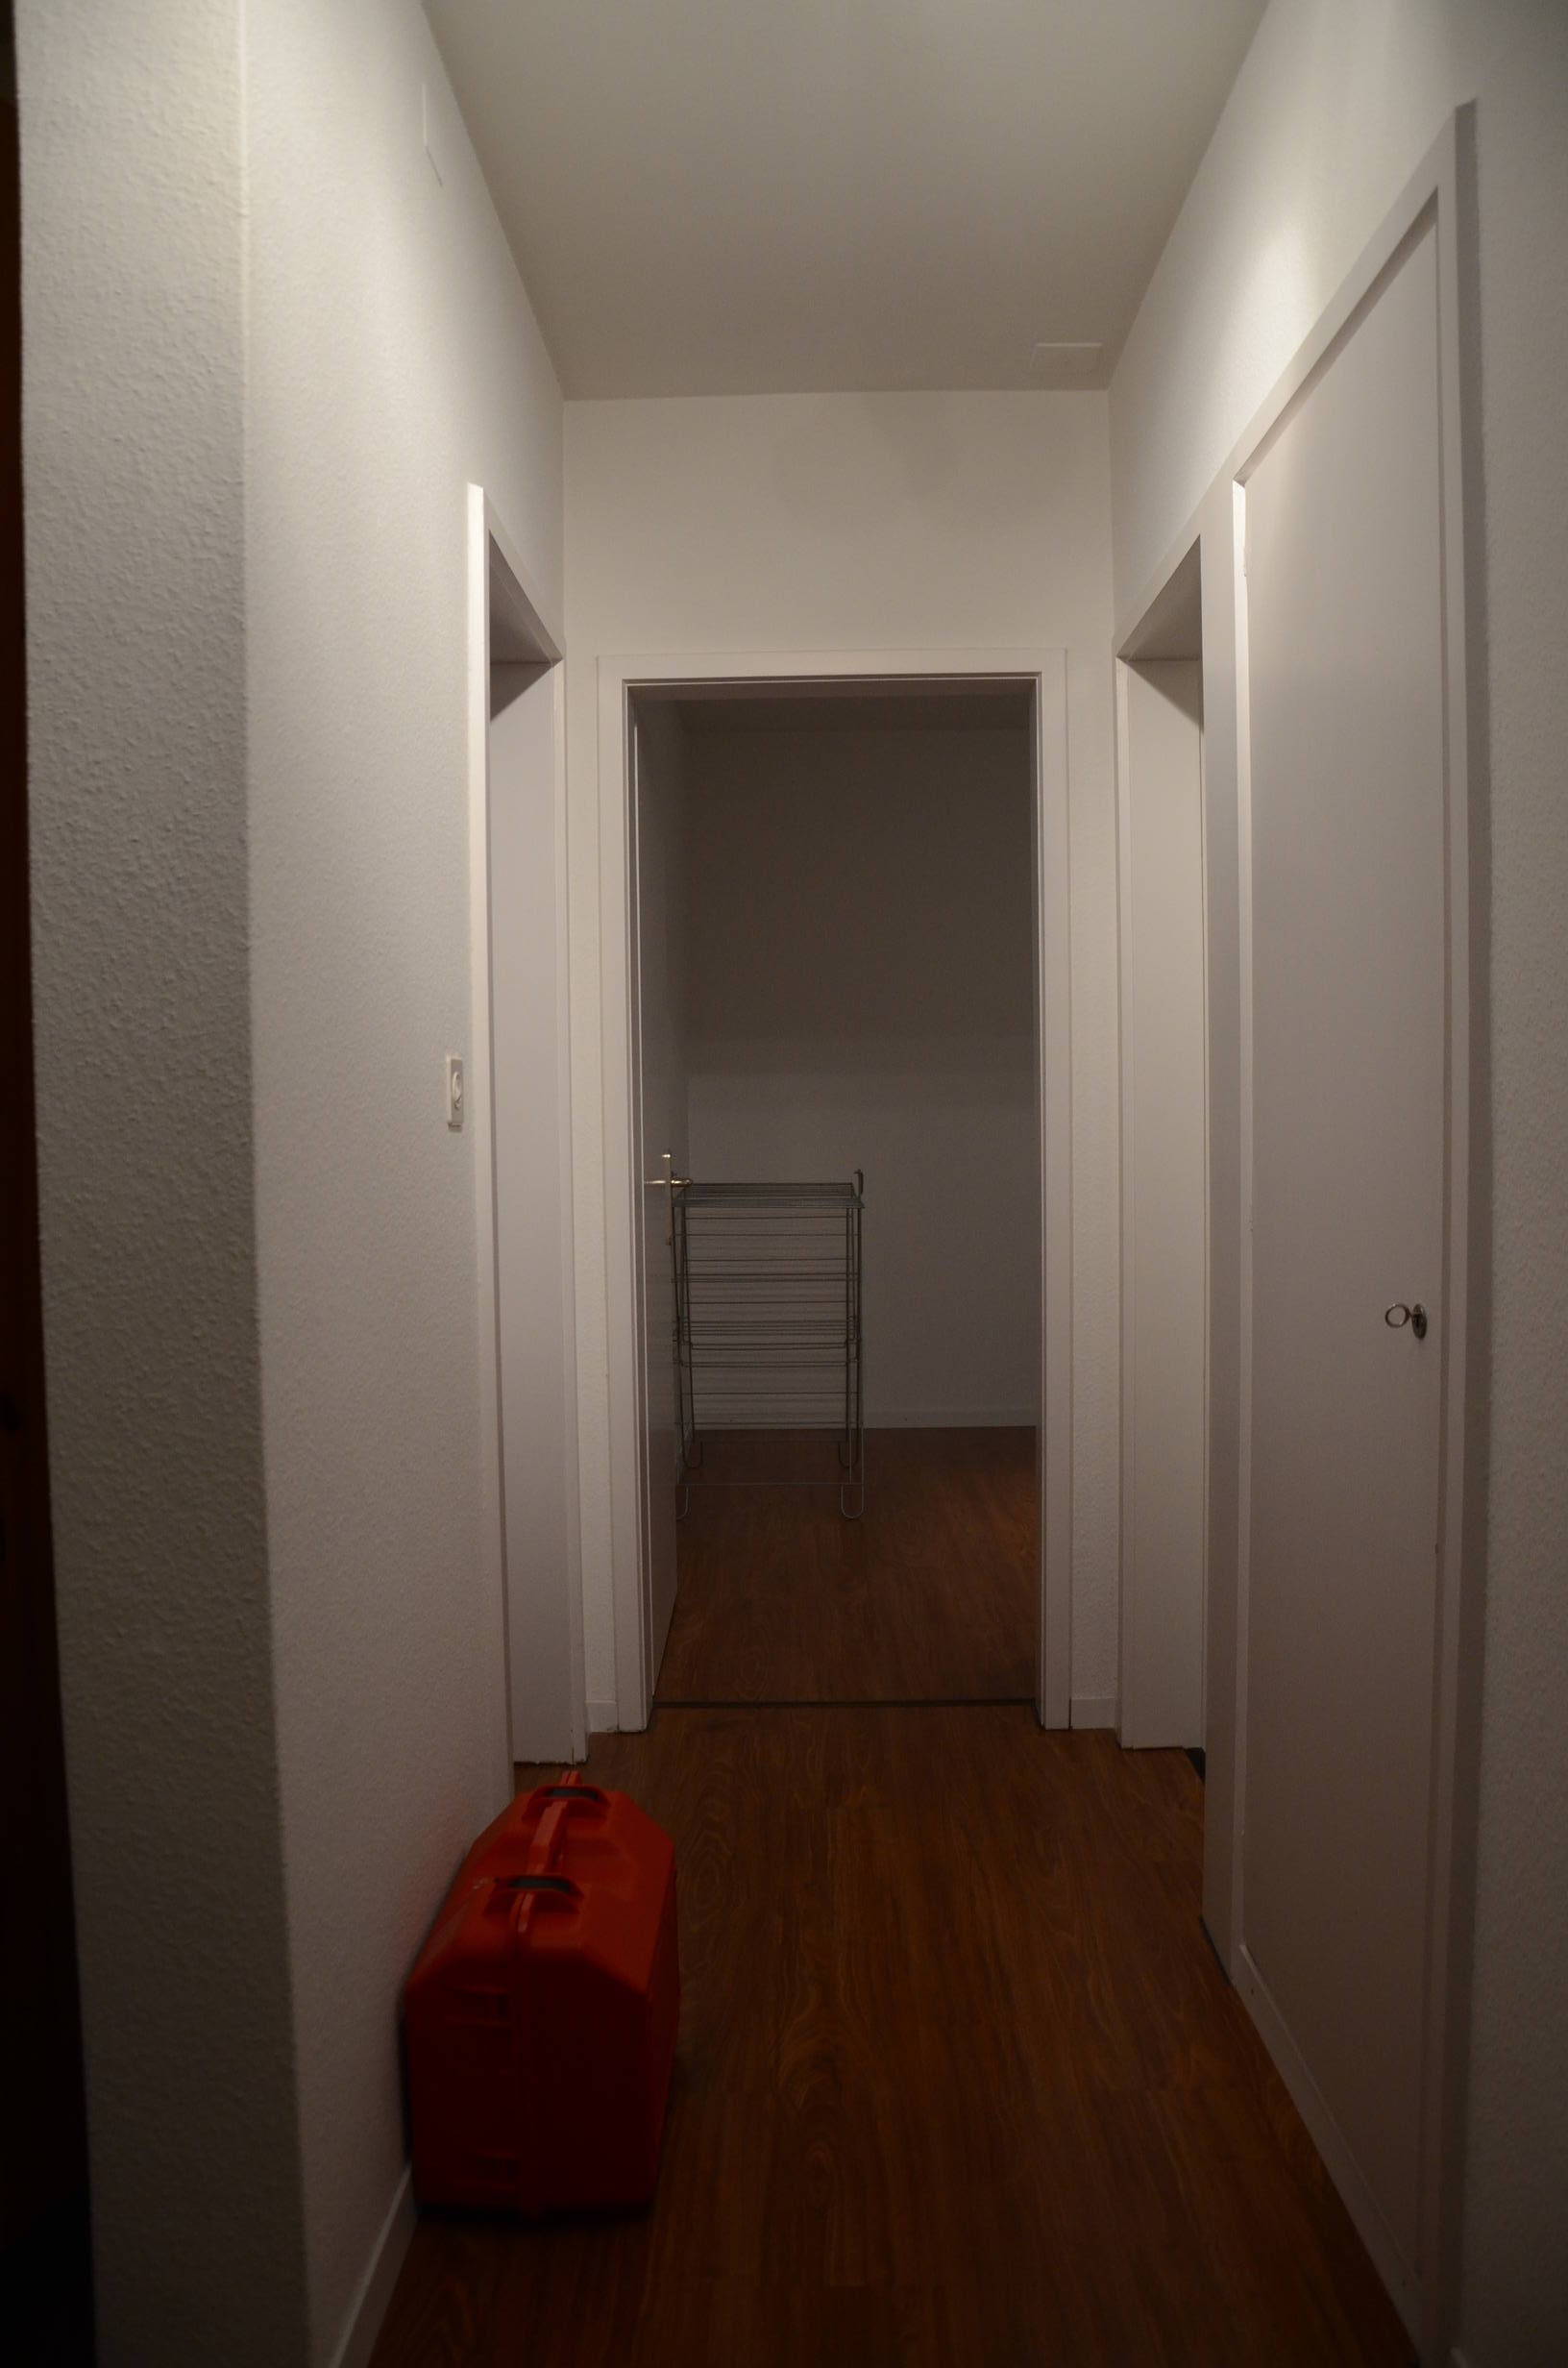 12 - Dynamic element: hallway with a red box